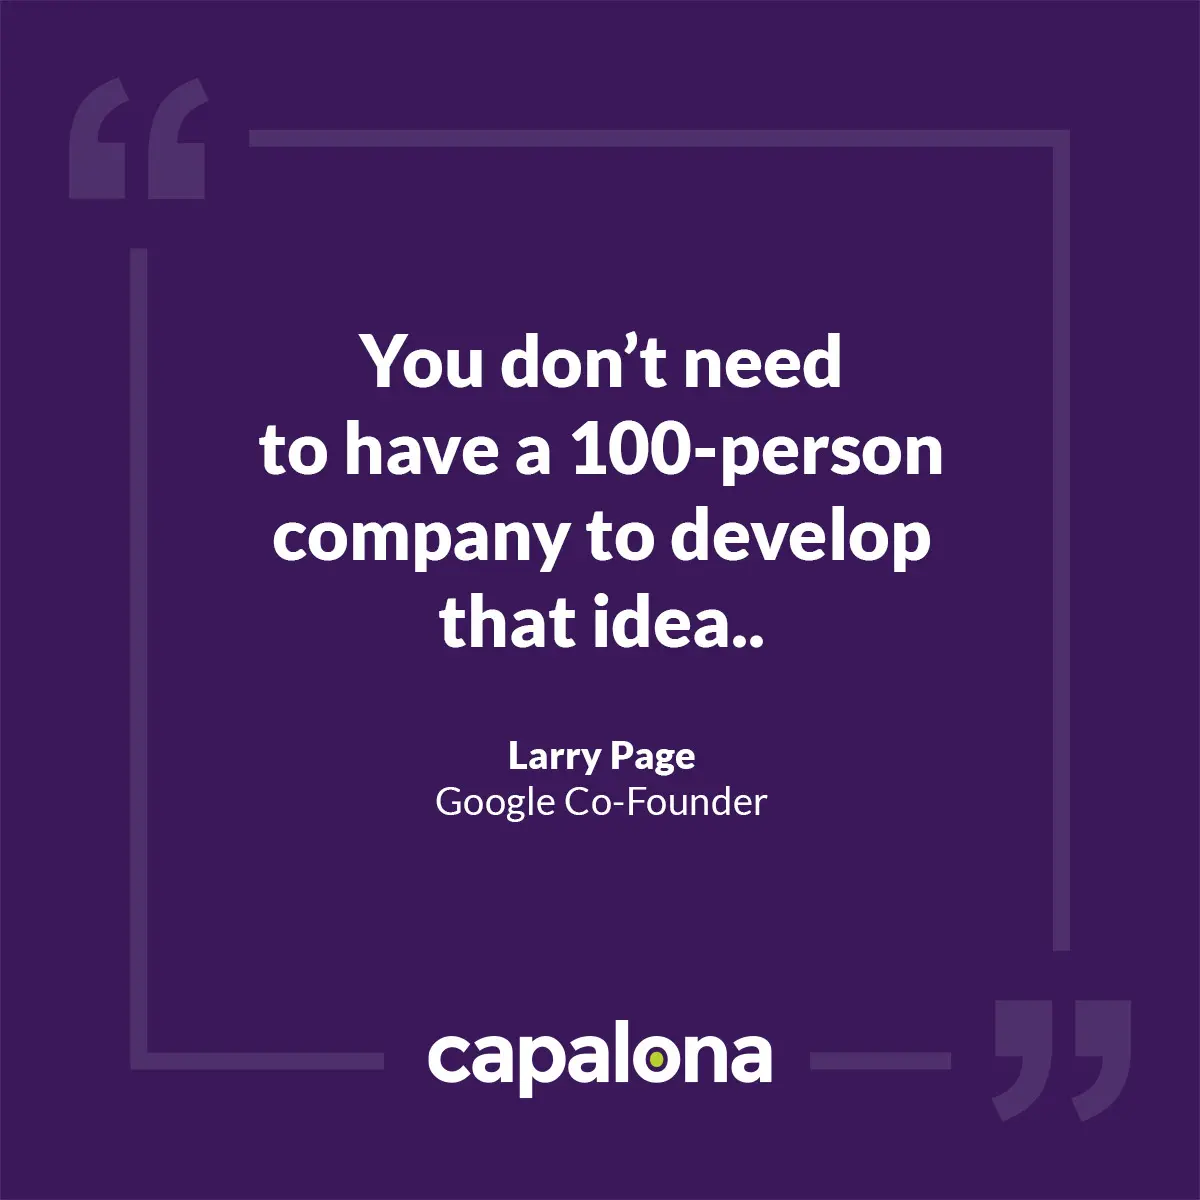 You don’t need to have a 100-person company to develop that idea — Larry Page, Google Co-Founder